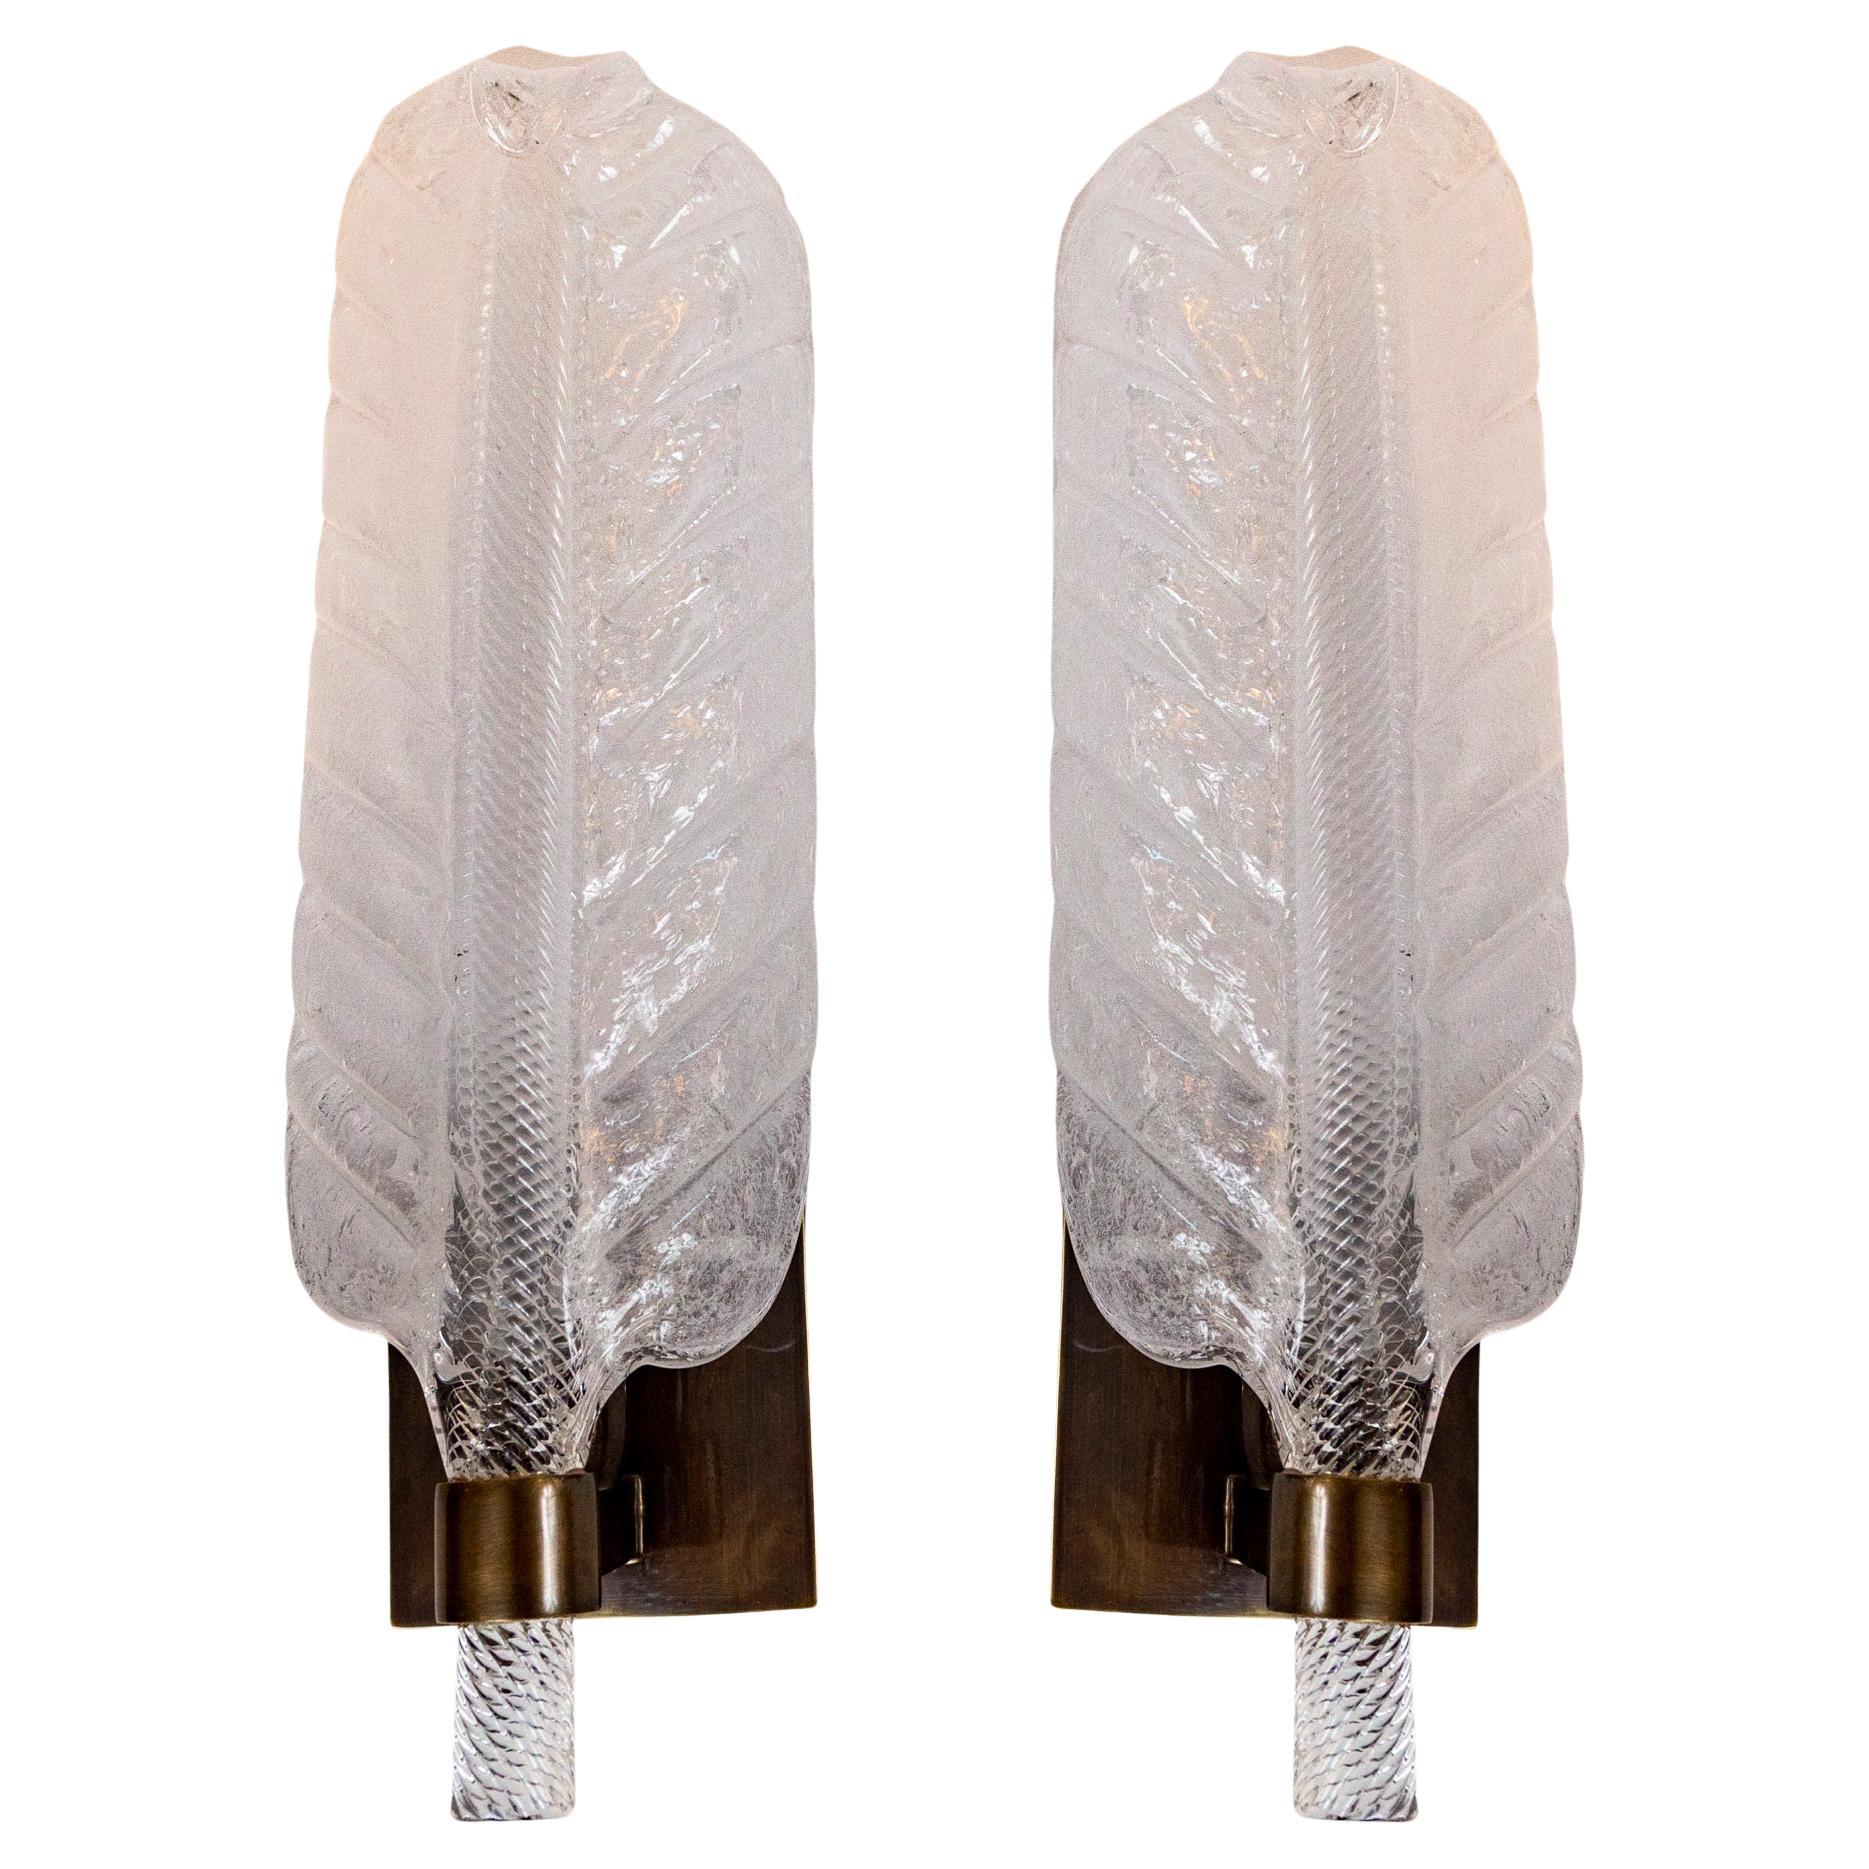 Smaller size frosted pulegoso style Murano blown wall lights with darkened brass fitting and wall plate.

Dating: Contemporary, commissioned work

 Illuminates with one candelabra bulb, UL Certified

Origin: Murano, Italy
Dimensions: overall